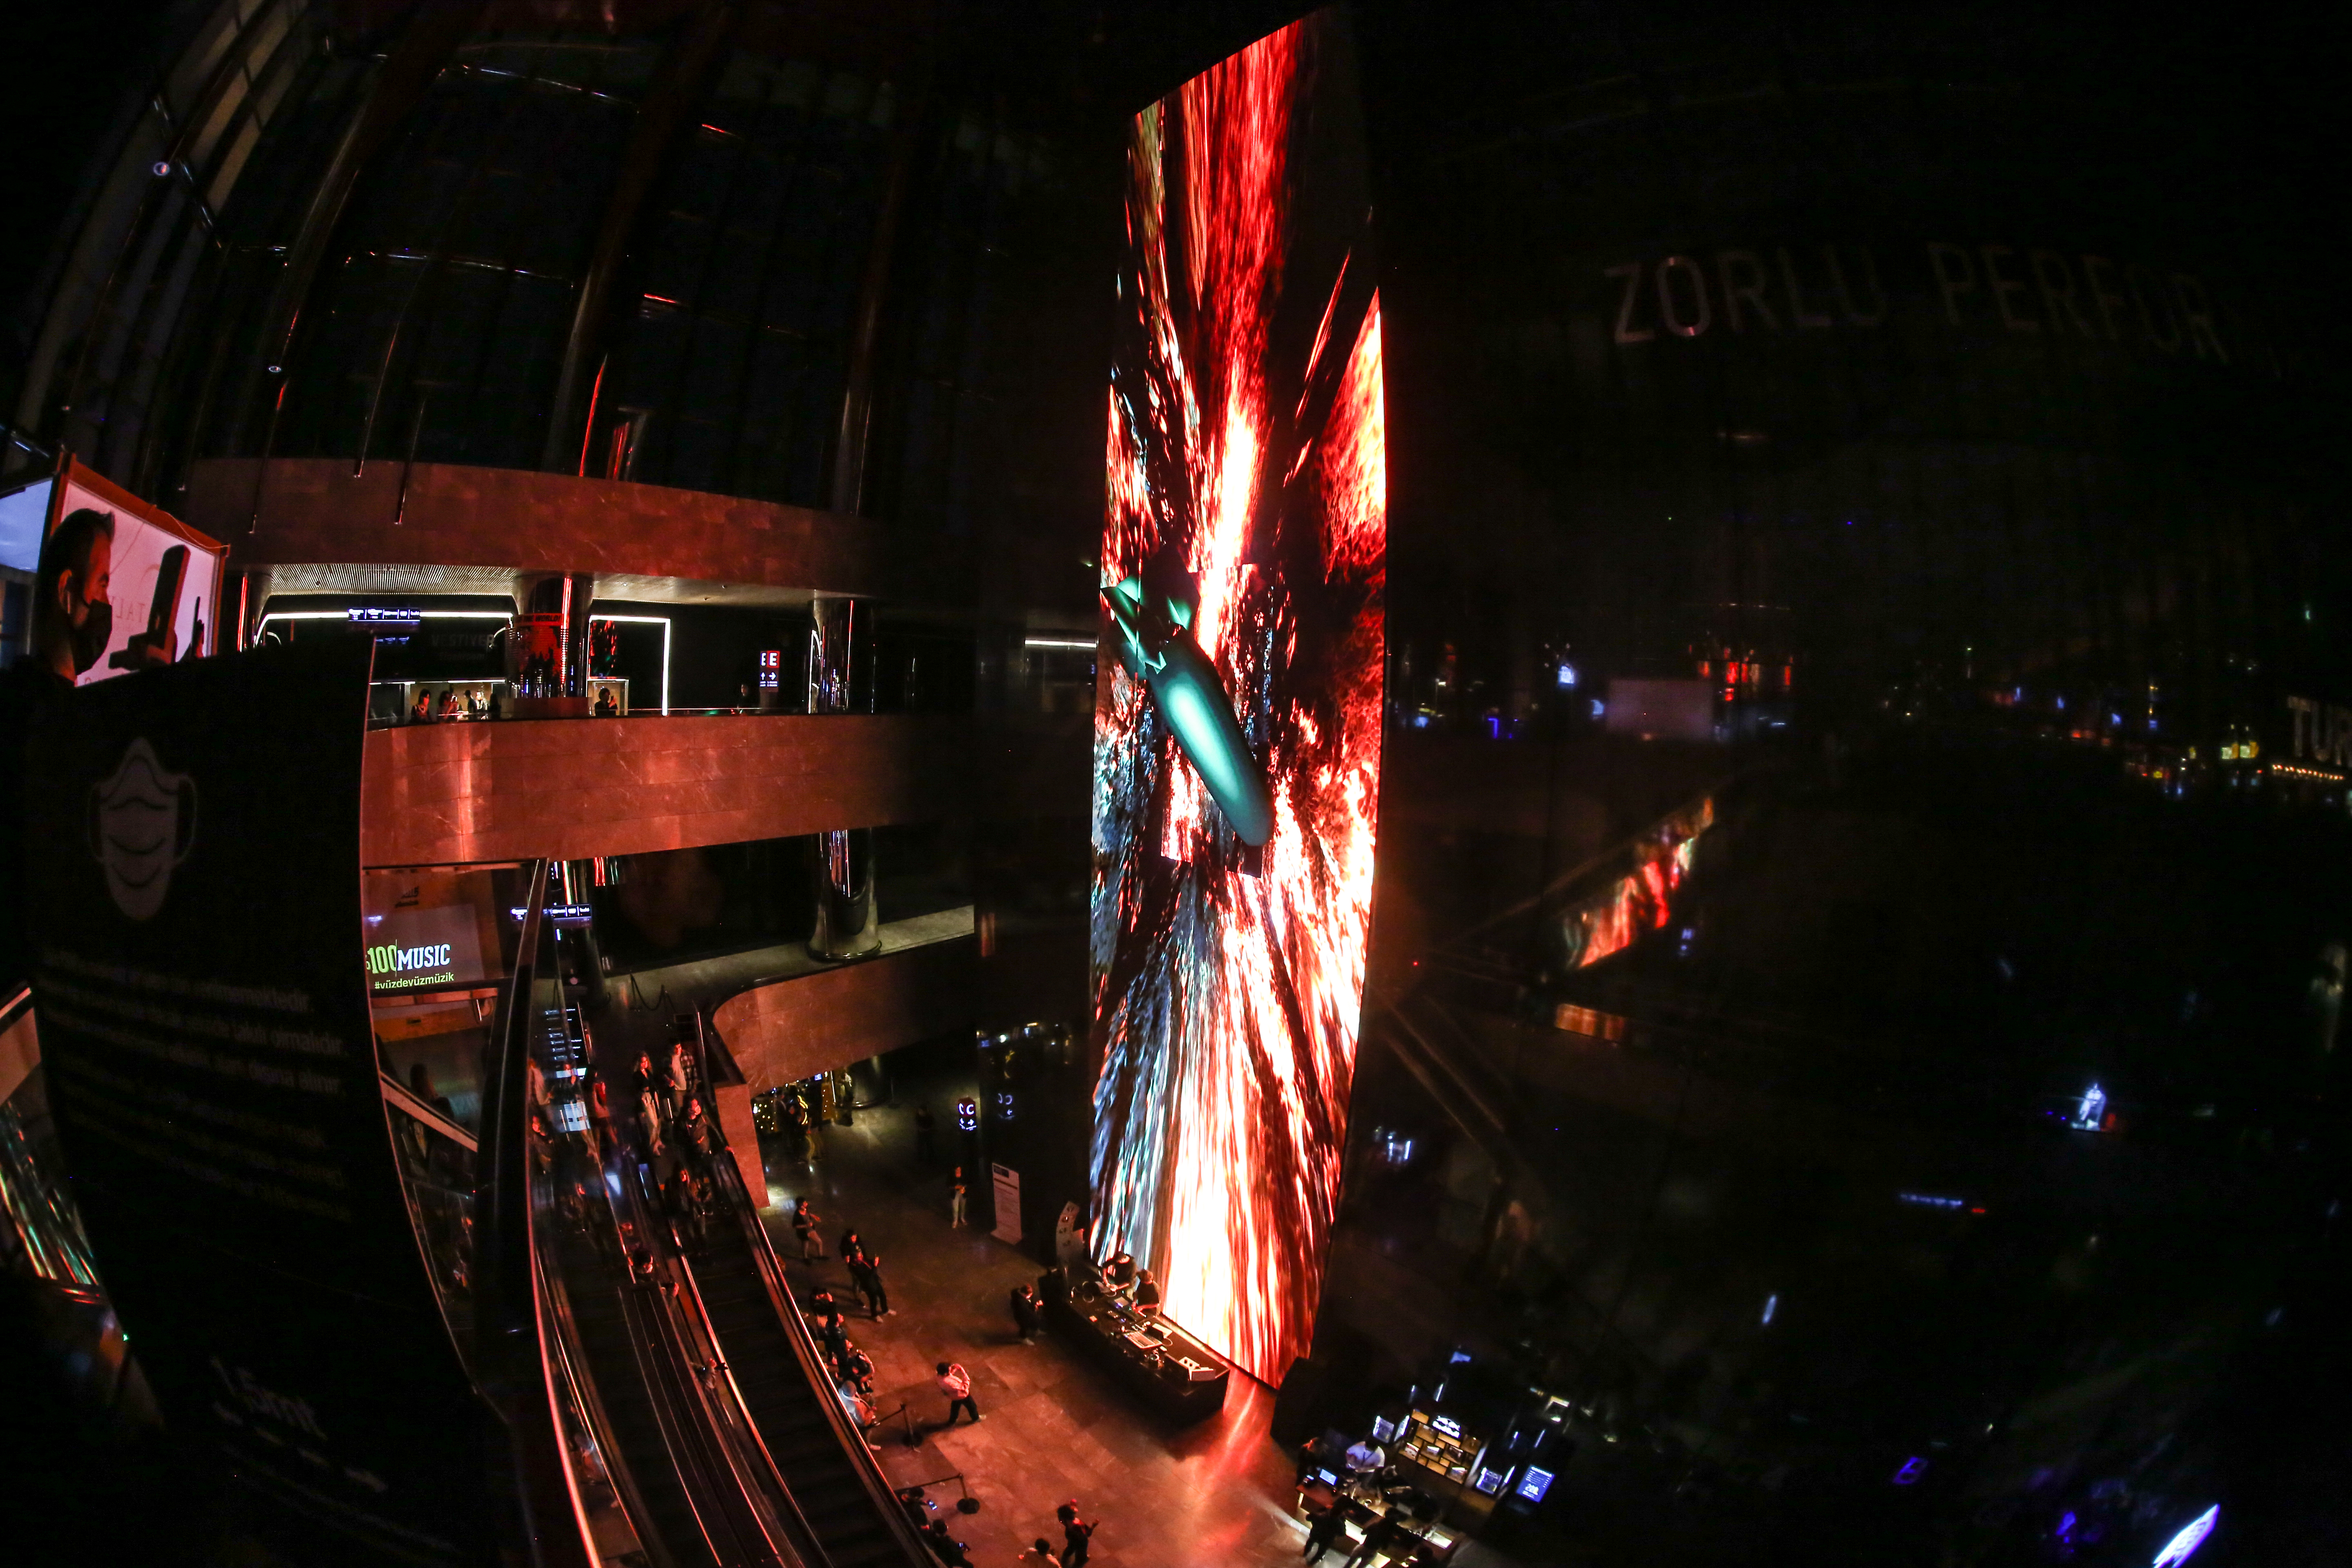 Fisheye view of a large vertical screen with bright red flame-like graphics. Below Huseyin Kuru and Kerem Demirayak navigate the audiovisual tools creating the images.